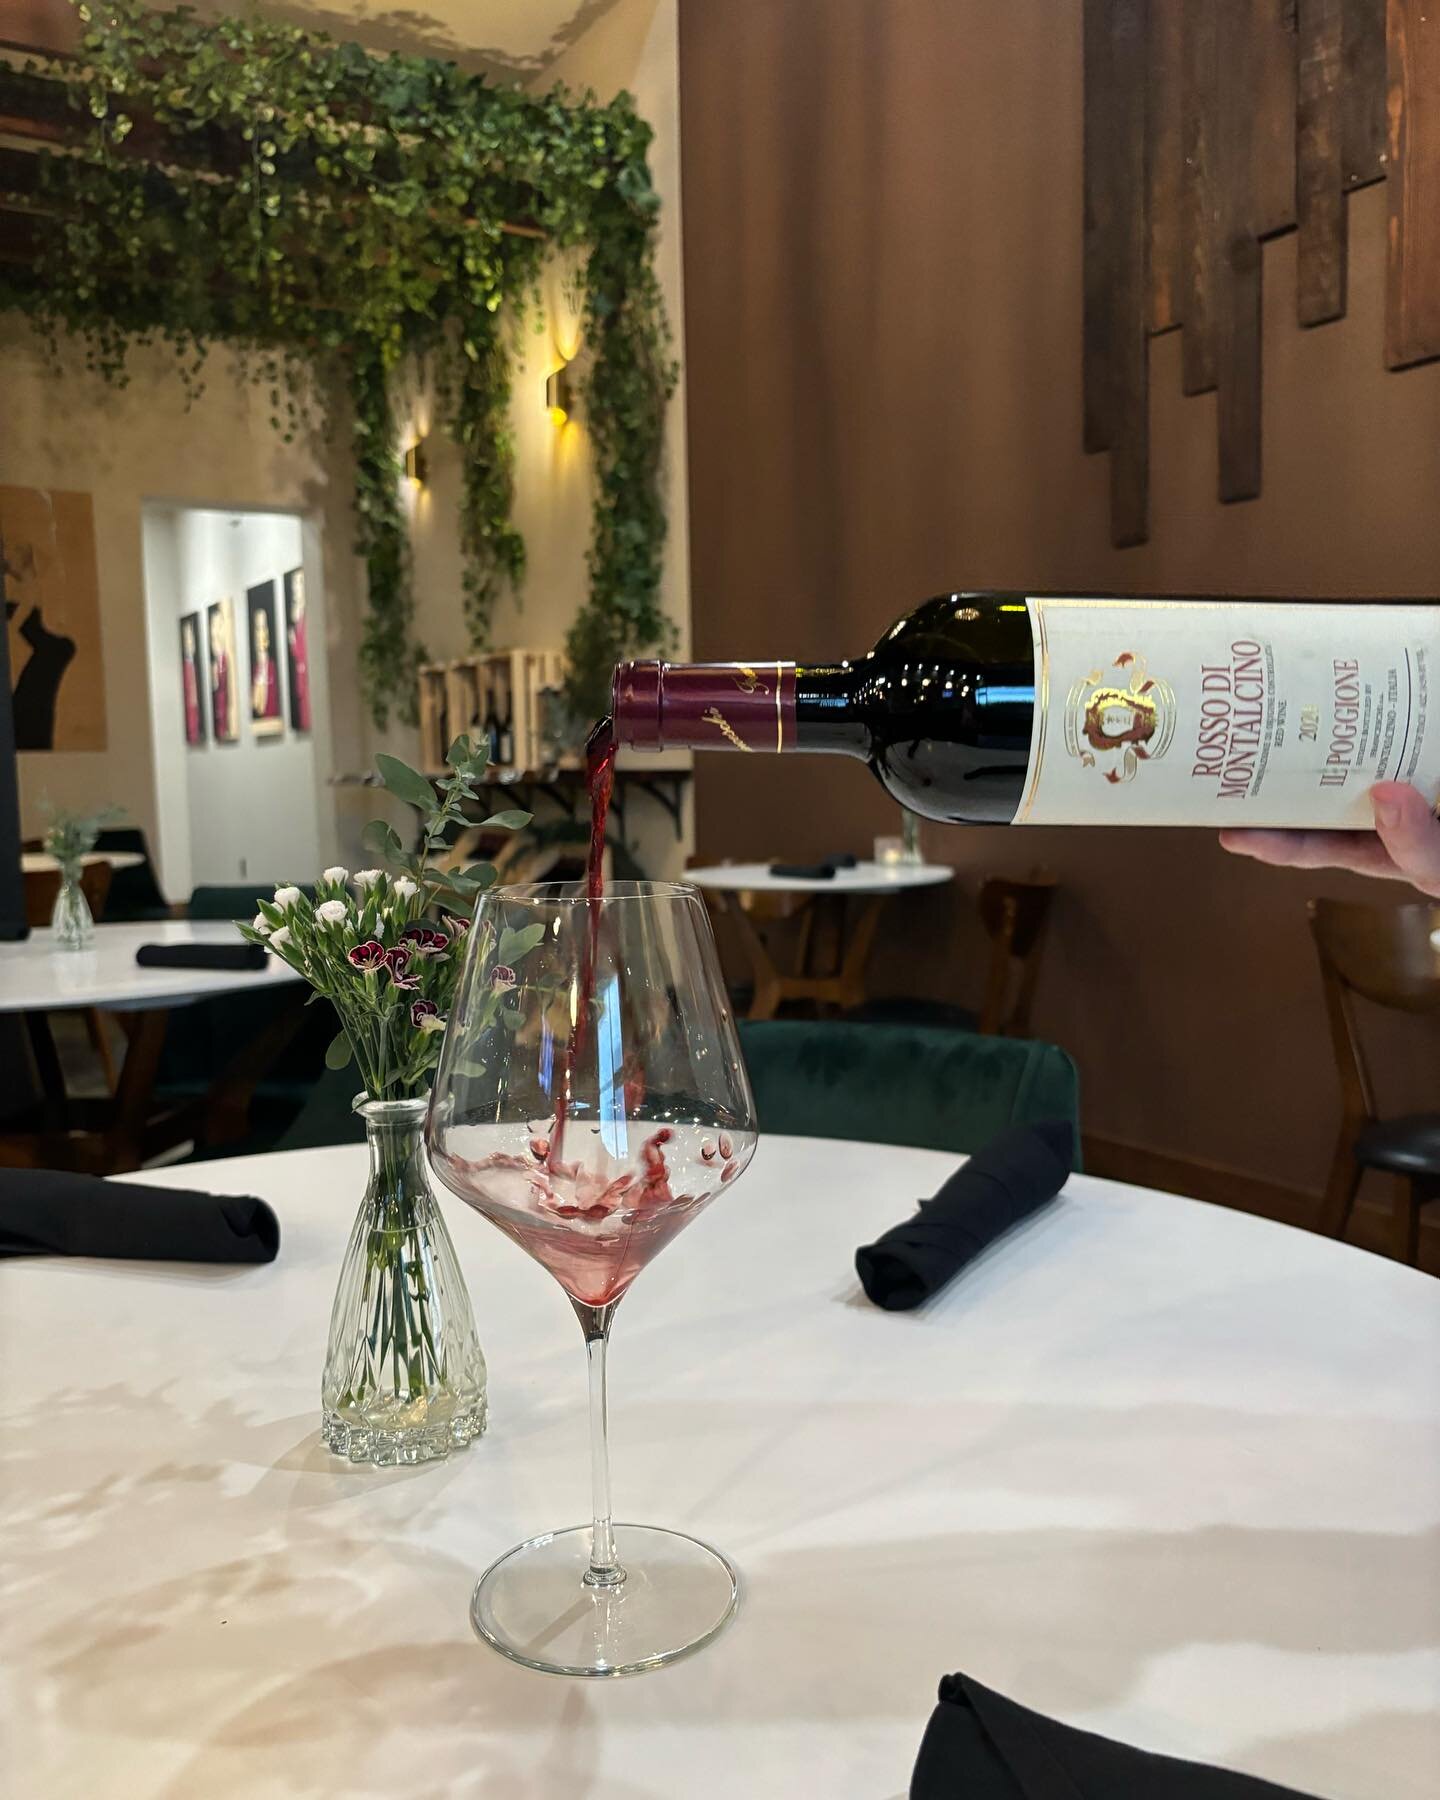 For a limited time we are offering this beautiful Italian wine by the glass 🍷🍷🍷 

One of the most highly regarded wineries in all of Tuscany, Tenuta Il Poggione makes incredibly powerful wines for collectors and everyday drinkers alike. The winery